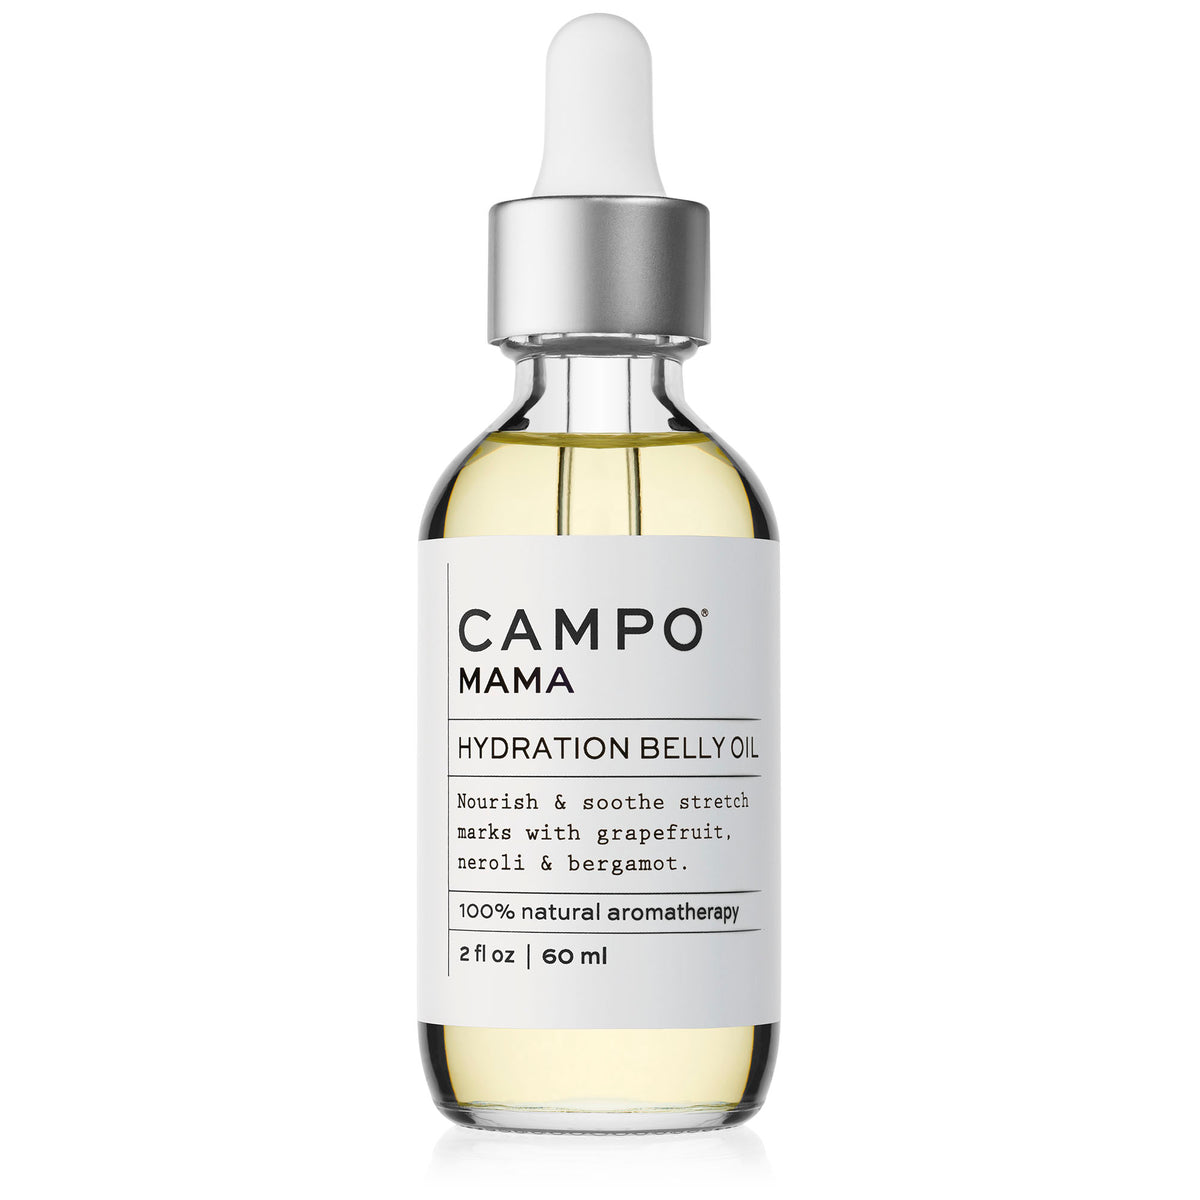 Campo Beauty Hydration Belly Oil - MAMA Stretch Mark Relief Blend that in 60 ml. Soothe sore muscles and pain. Nourish and soothe stretched skin with essential oils of grapefruit, neroli &amp; bergamot infused in luxury vitamin-rich beauty oils of sweet almond, camellia seed, avocado, olive oil, sunflower &amp; vitamin e. Help prevent stretch marks and give your skin an instant glow and an infusion of nourishing, deep hydration without a greasy feel. Soothe the itch.